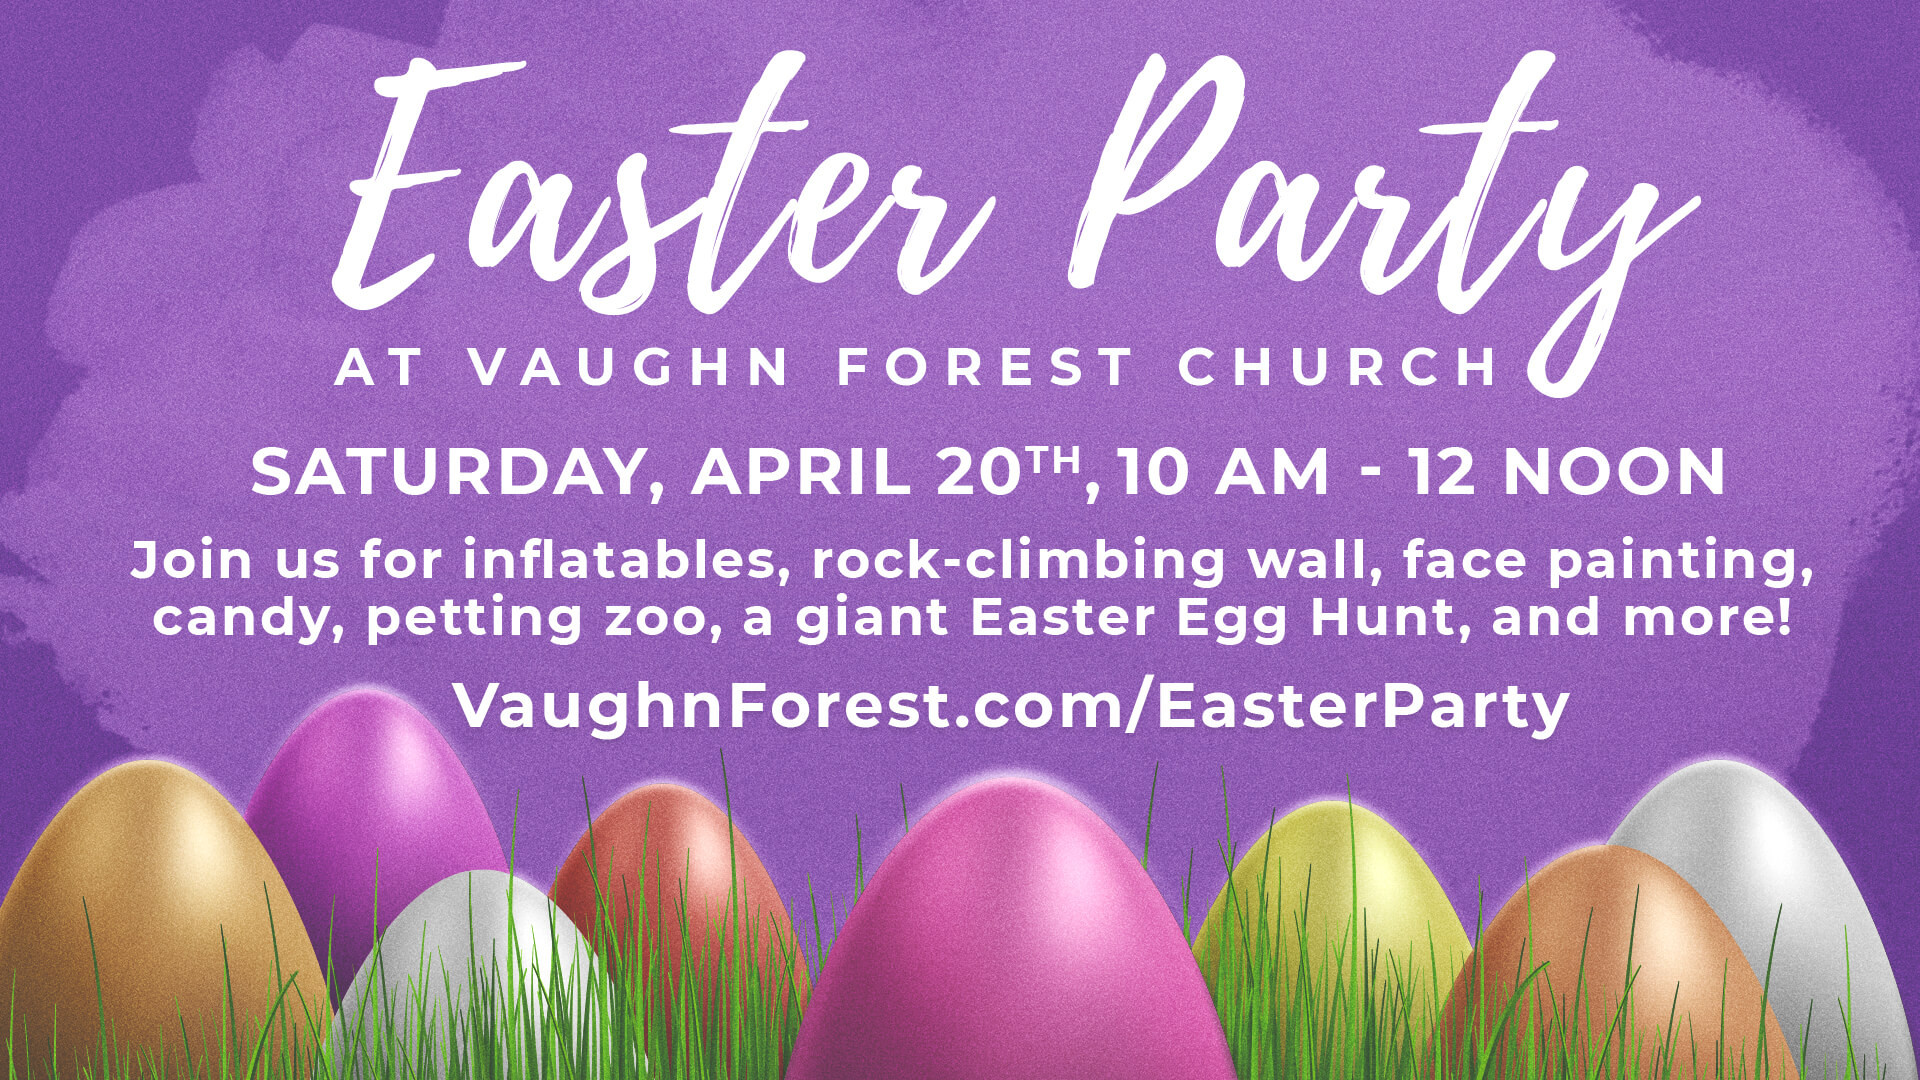 Easter Party Ideas For Church
 Easter Party Vaughn Forest Church